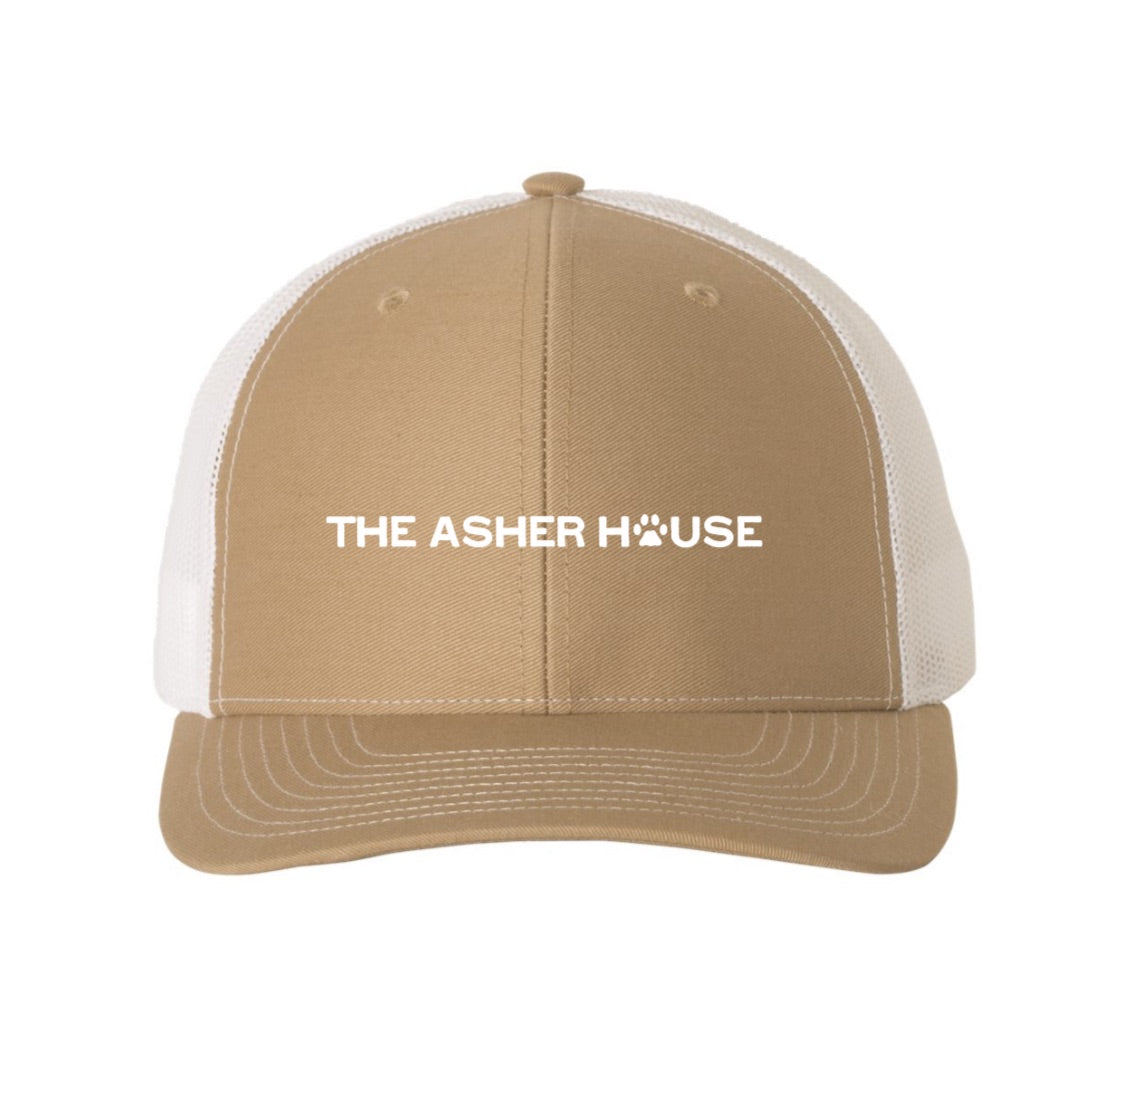 The Asher House Trucker Snapback Hat-5 Colors